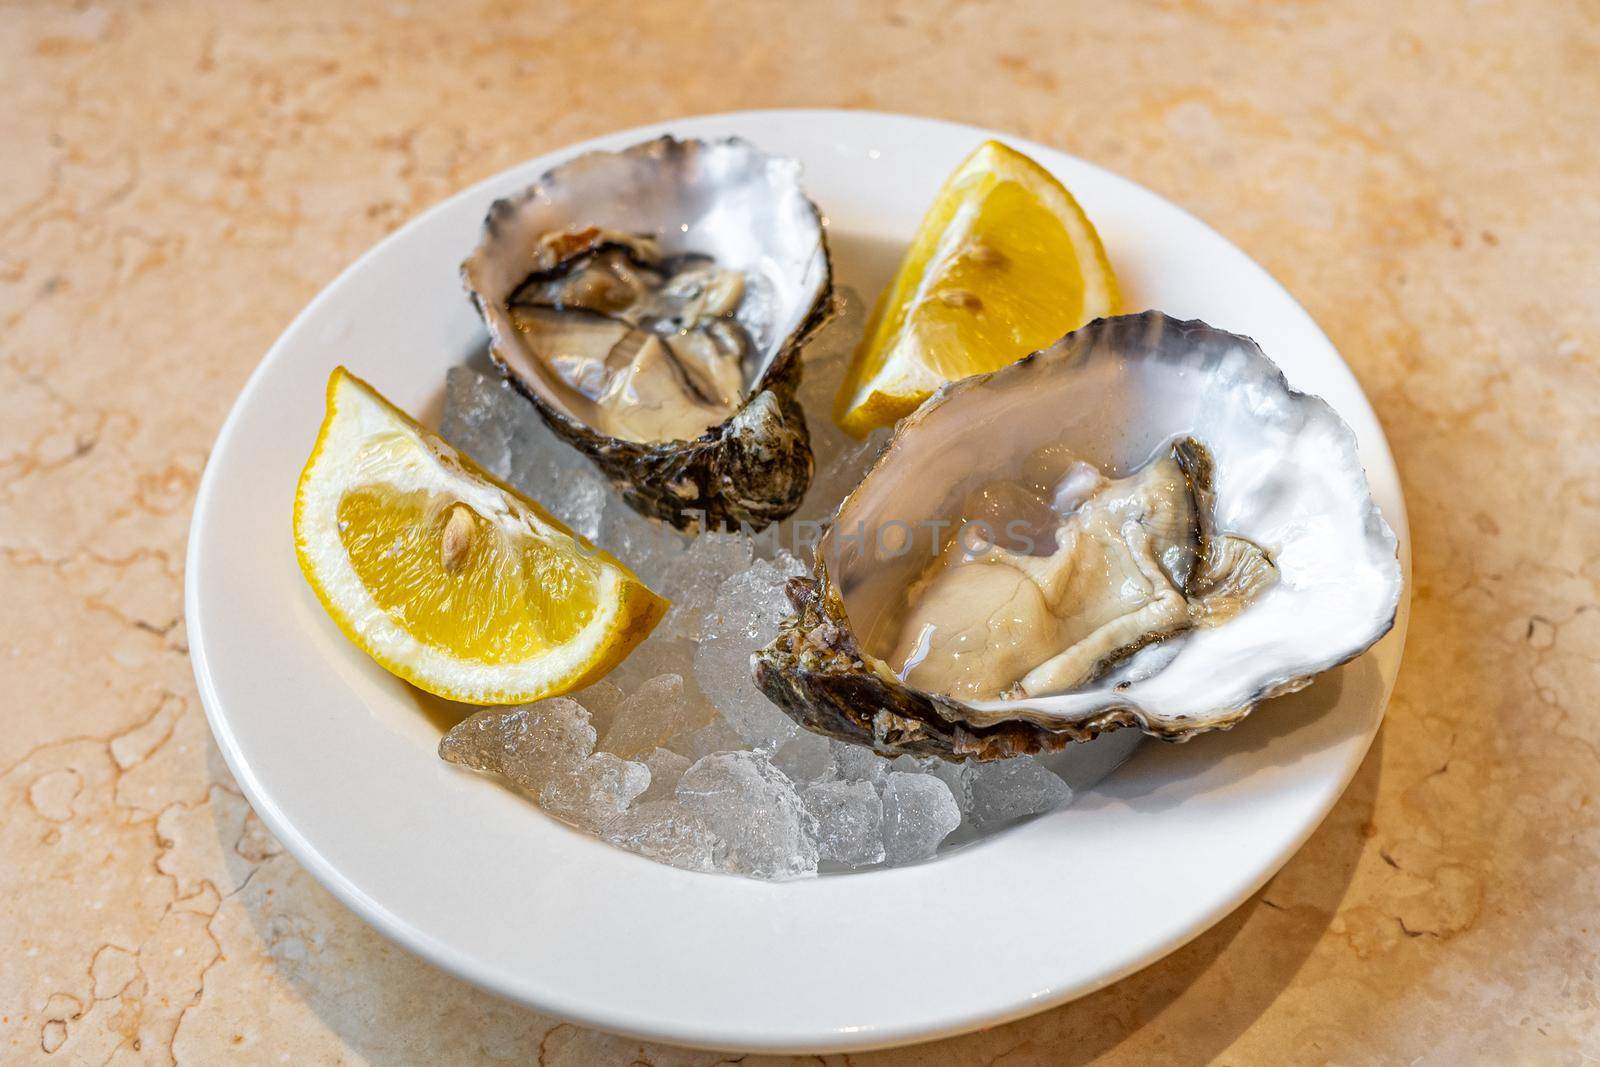 Delicious fresh oysters served on a white plate with ice and lemon slices. Seafood ready for eat.